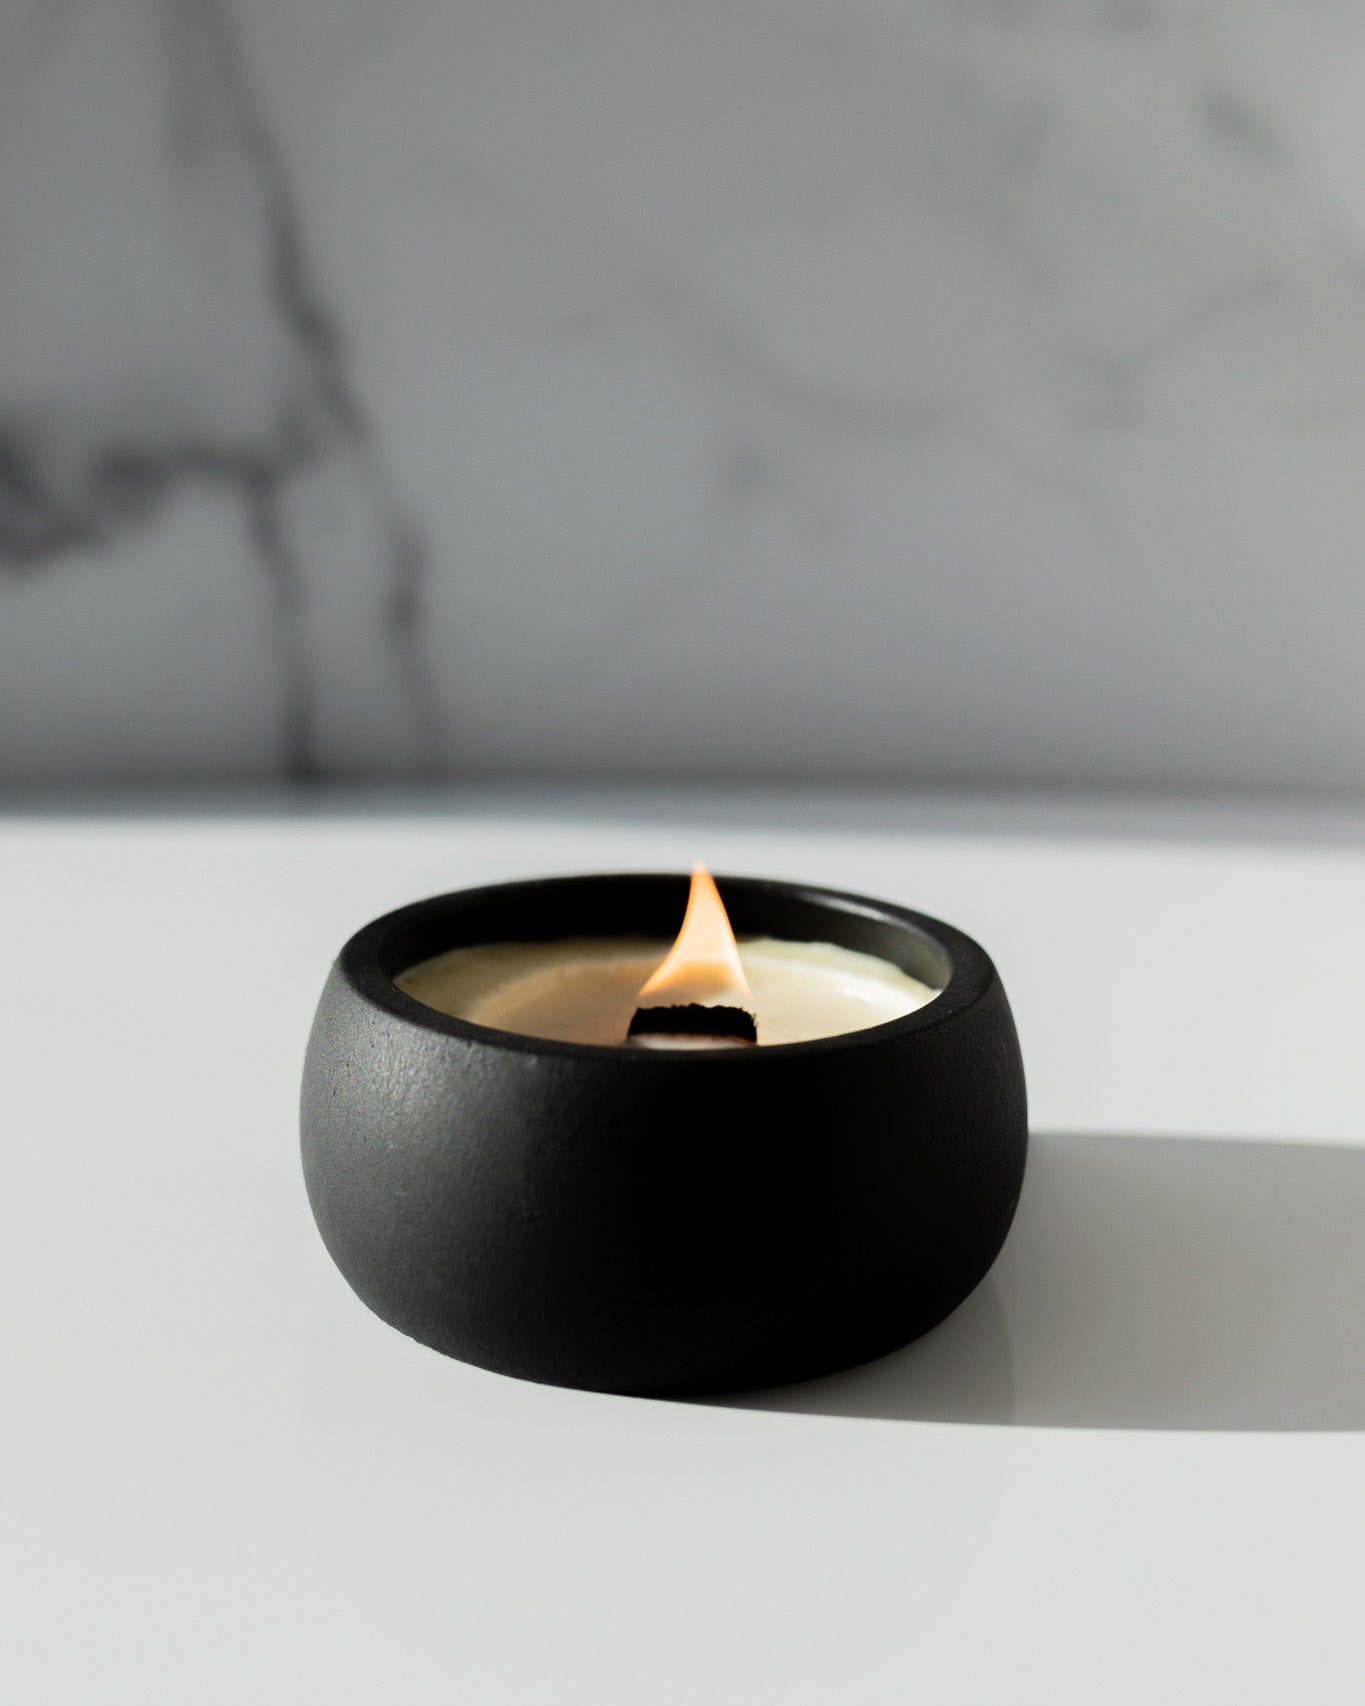 Mull It Over Coconut Soy Candle - Black Concrete Wooden Wick Vessel